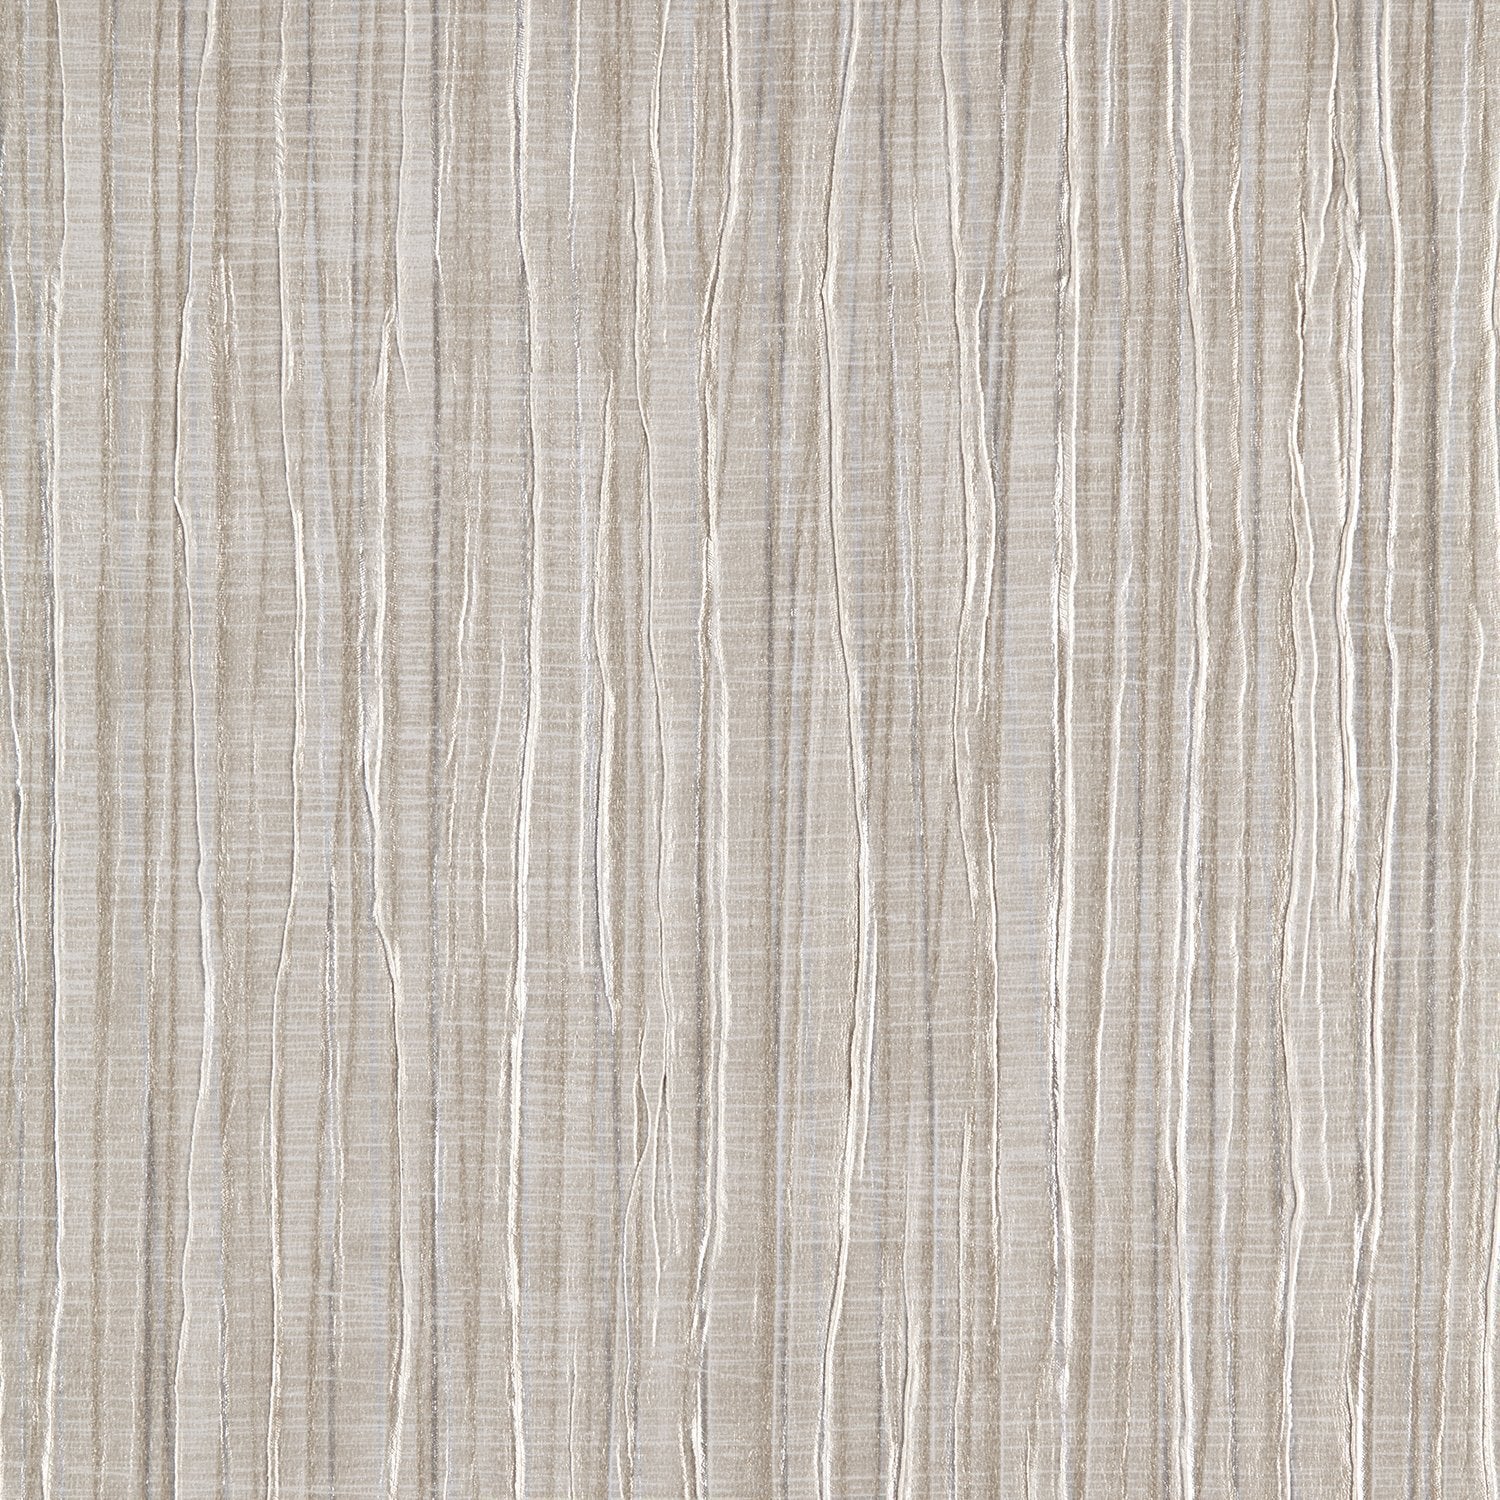 Vogue Pleat - Y47022 - Wallcovering - Vycon - Kube Contract